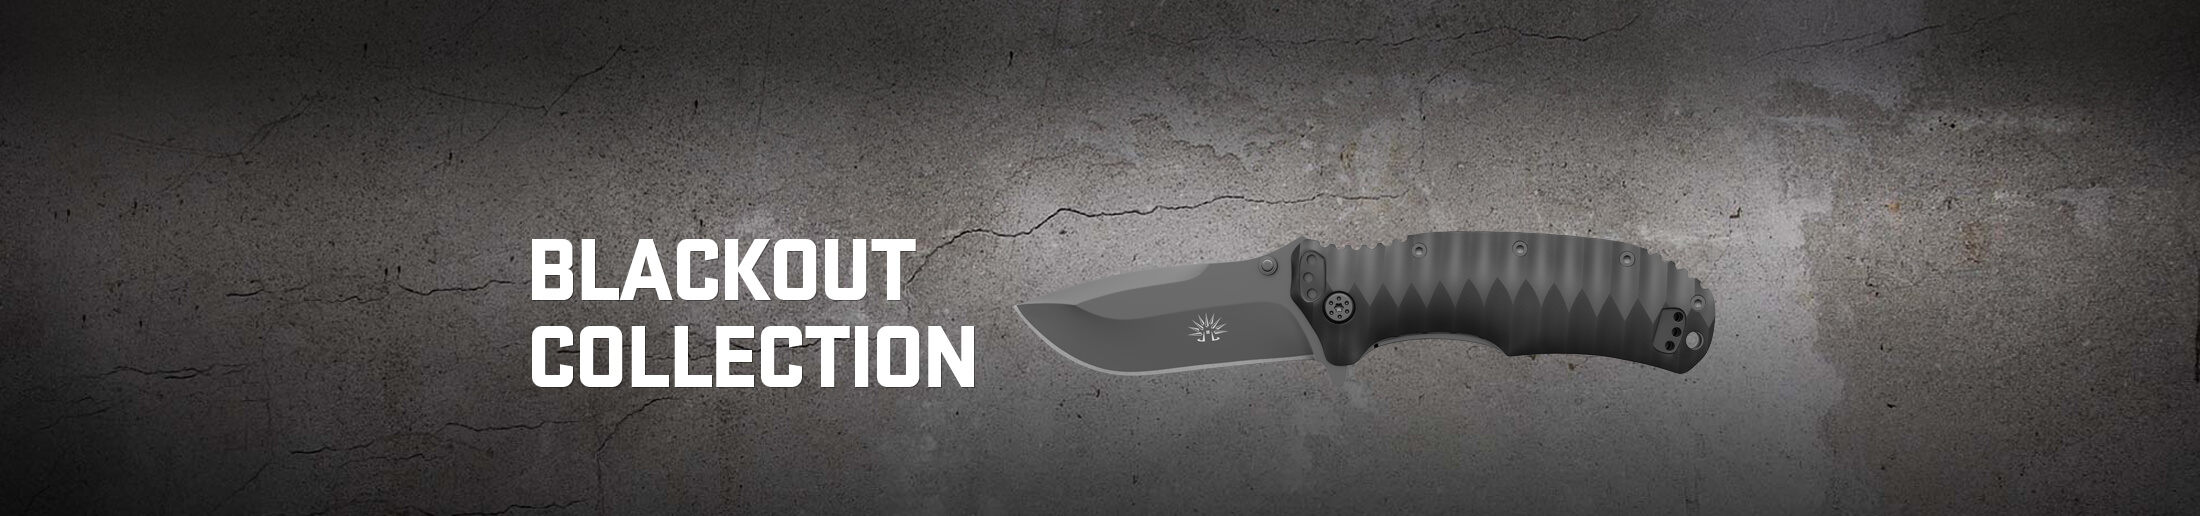 Off-Grid Collections - Blackout Collection - Off-Grid Knives